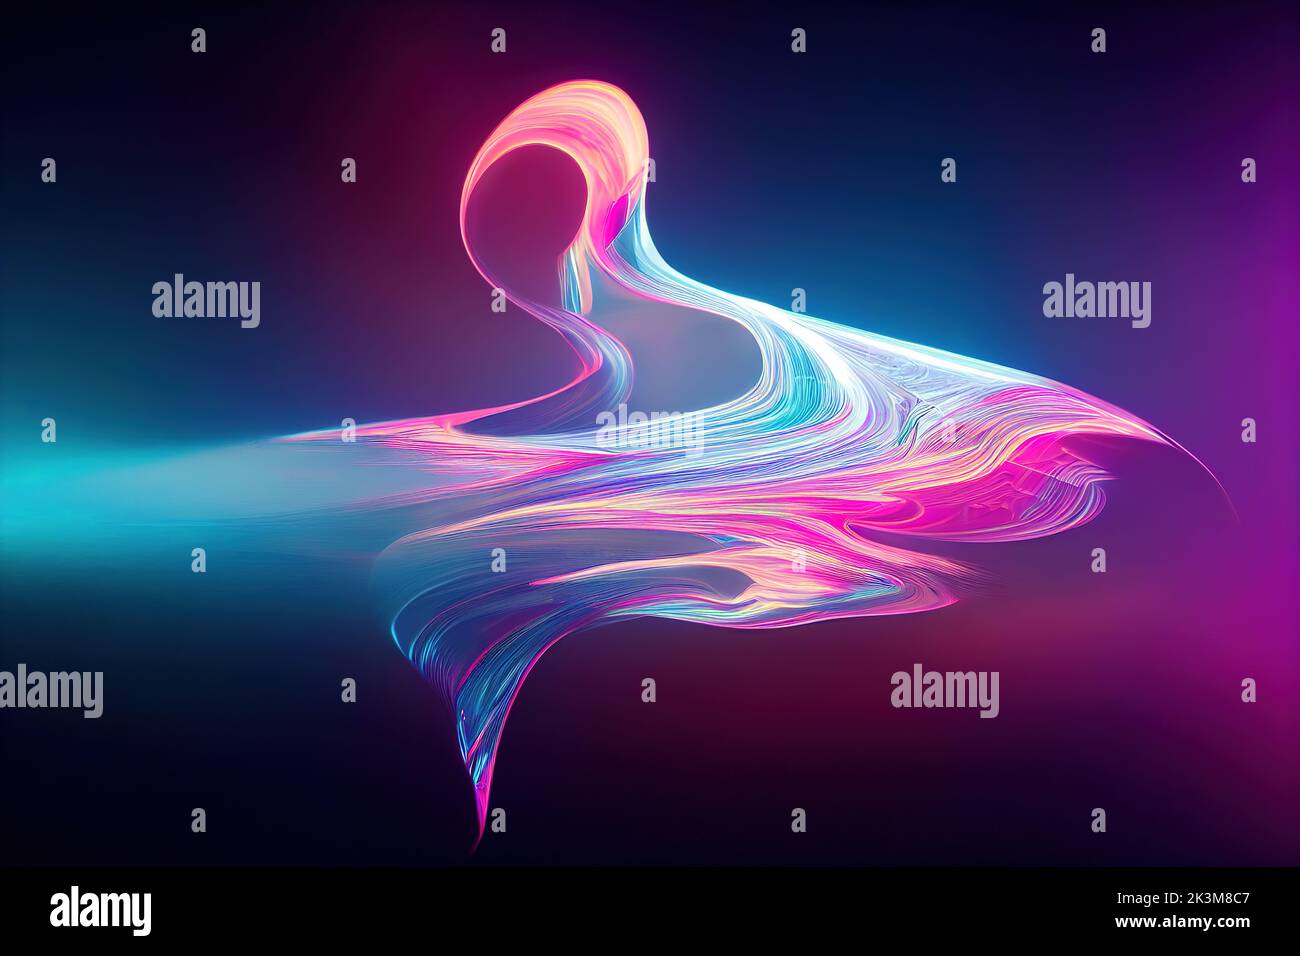 Colorful glow abstract background with waves art pattern. 3D style illustration. Stock Photo